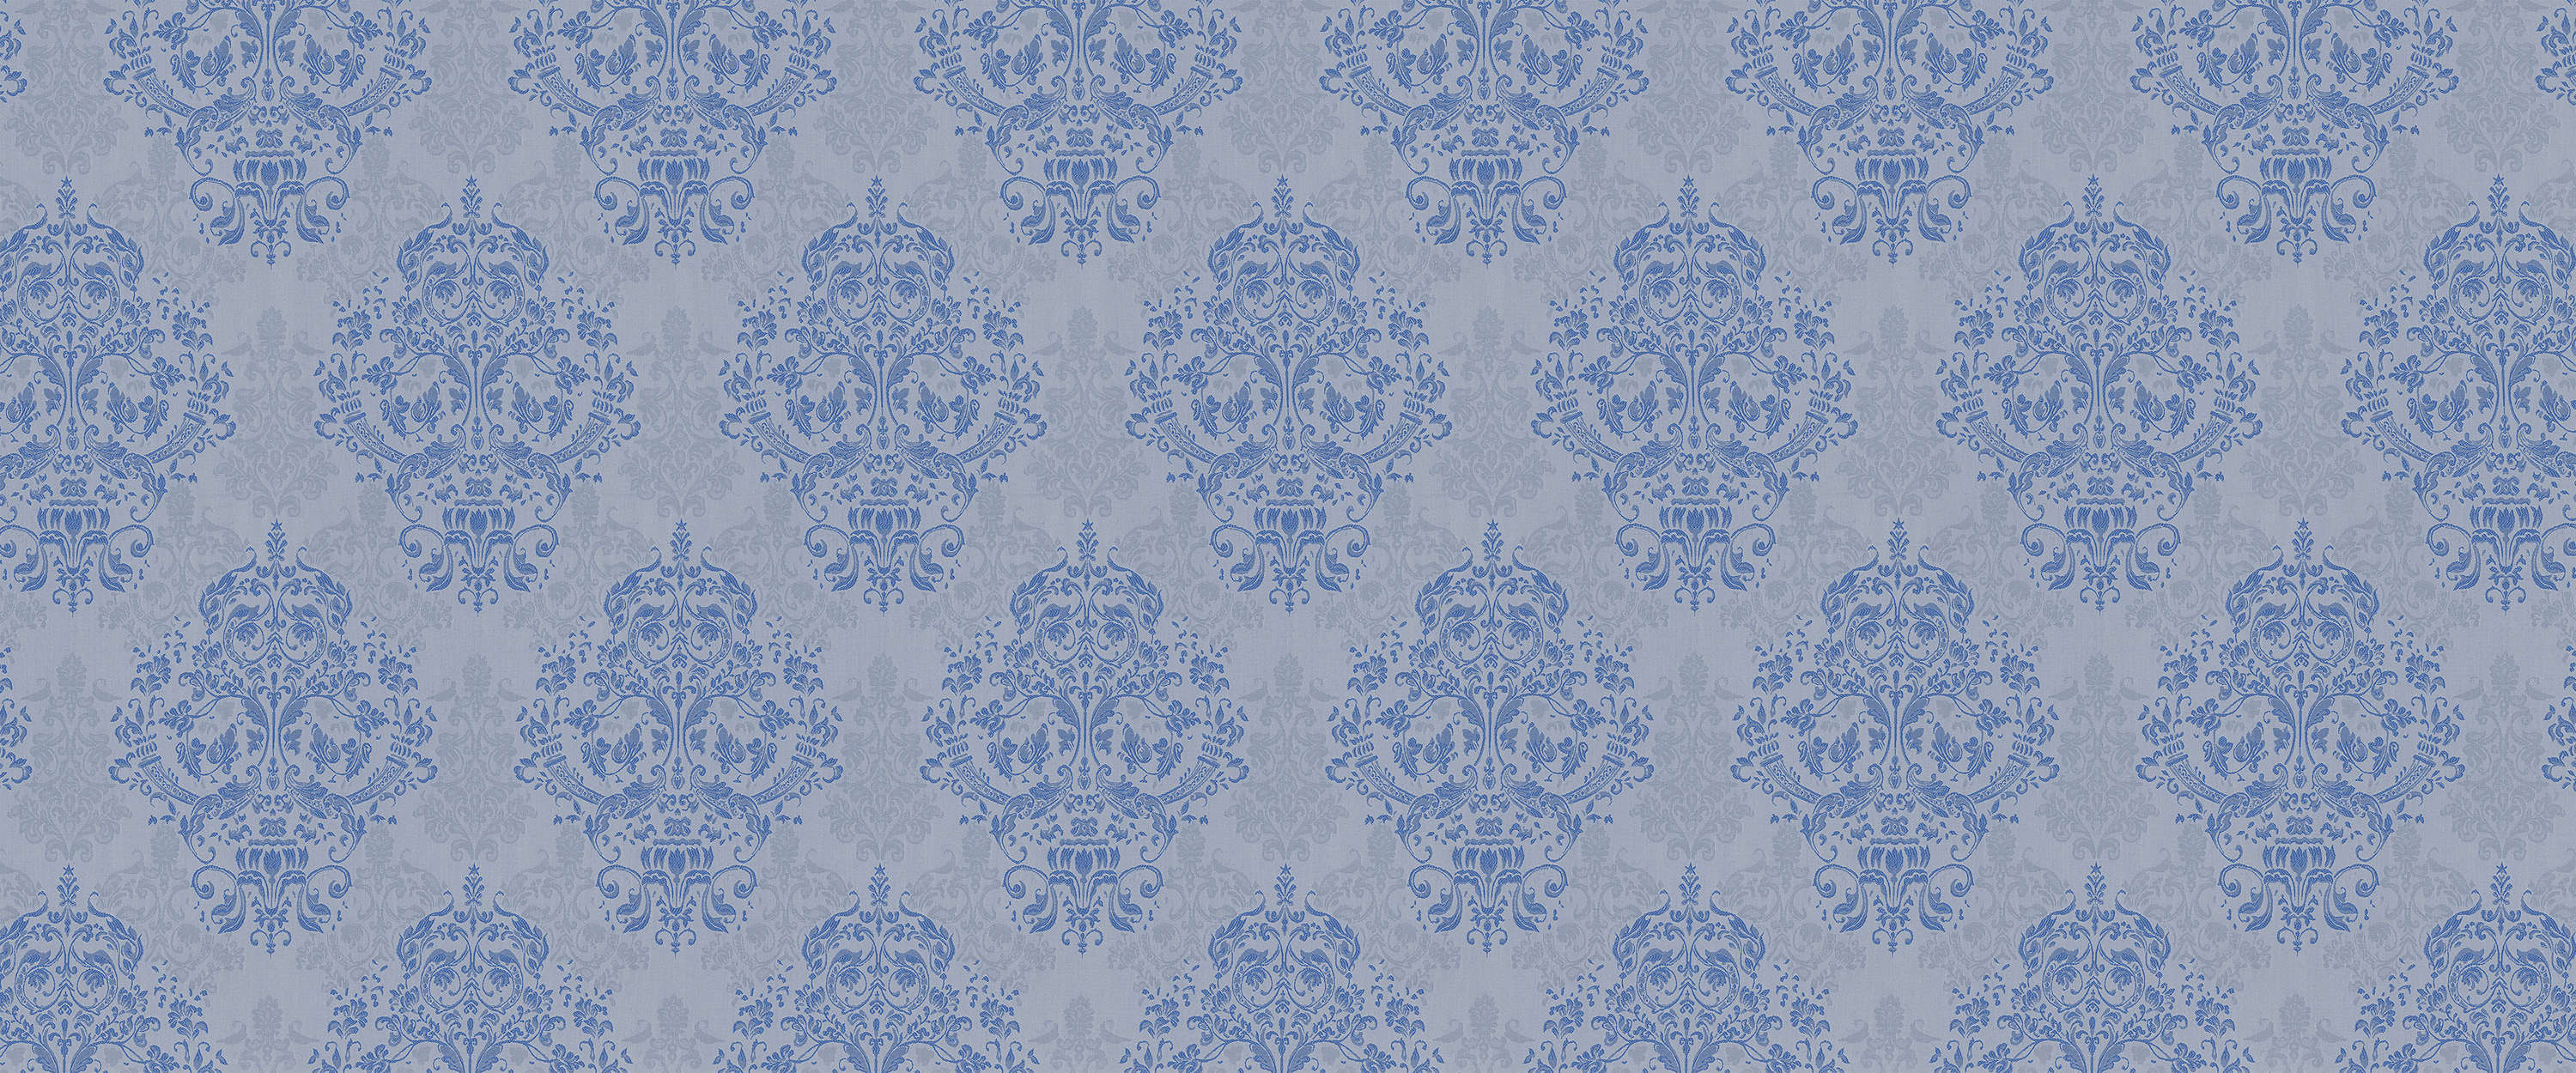             Baroque blue & grey mural with ornament design
        